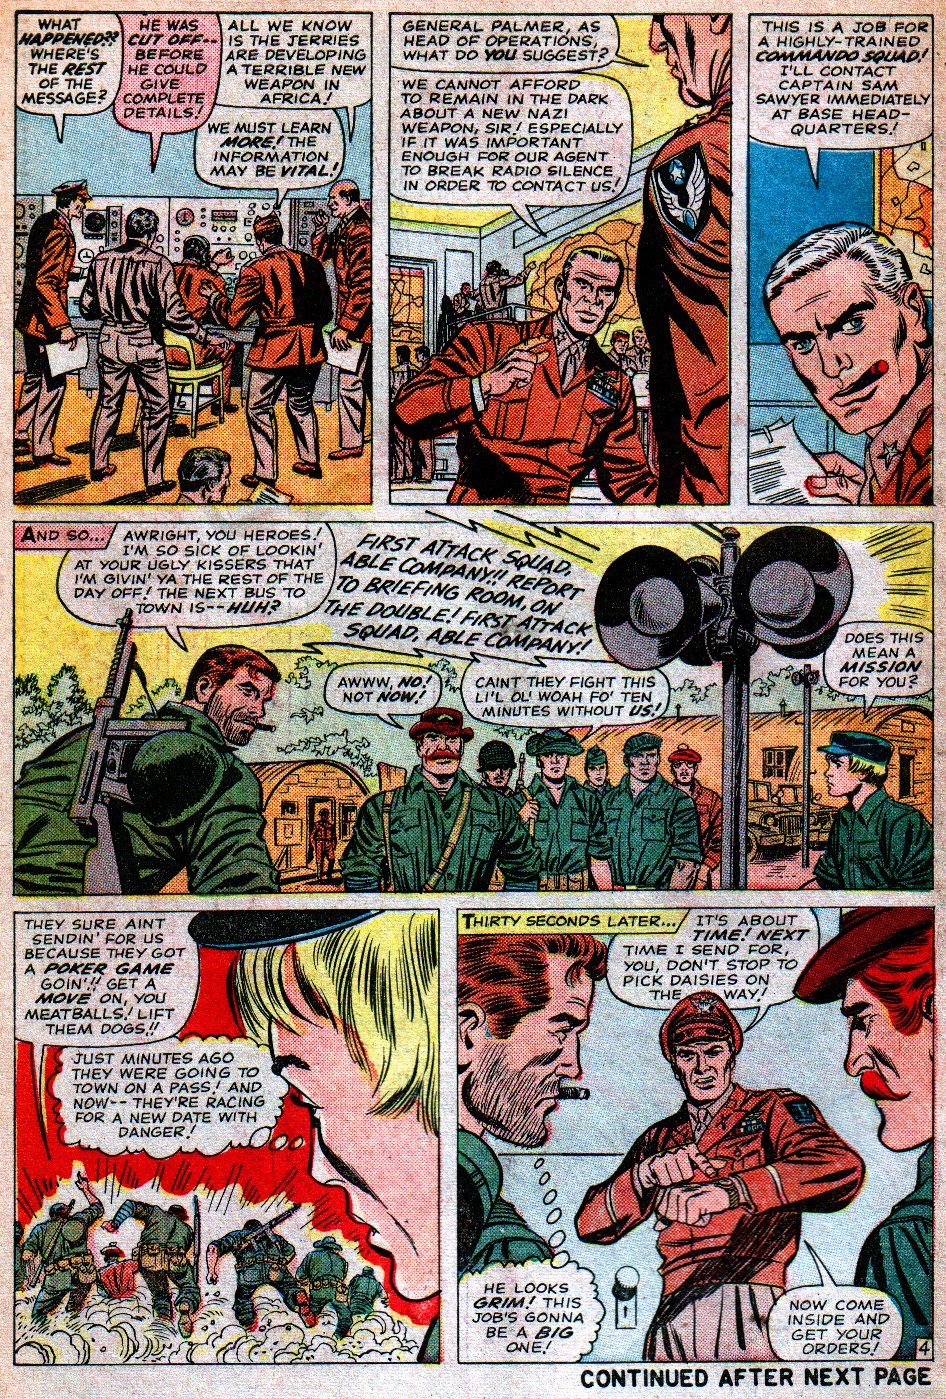 Read online Sgt. Fury comic -  Issue #16 - 6